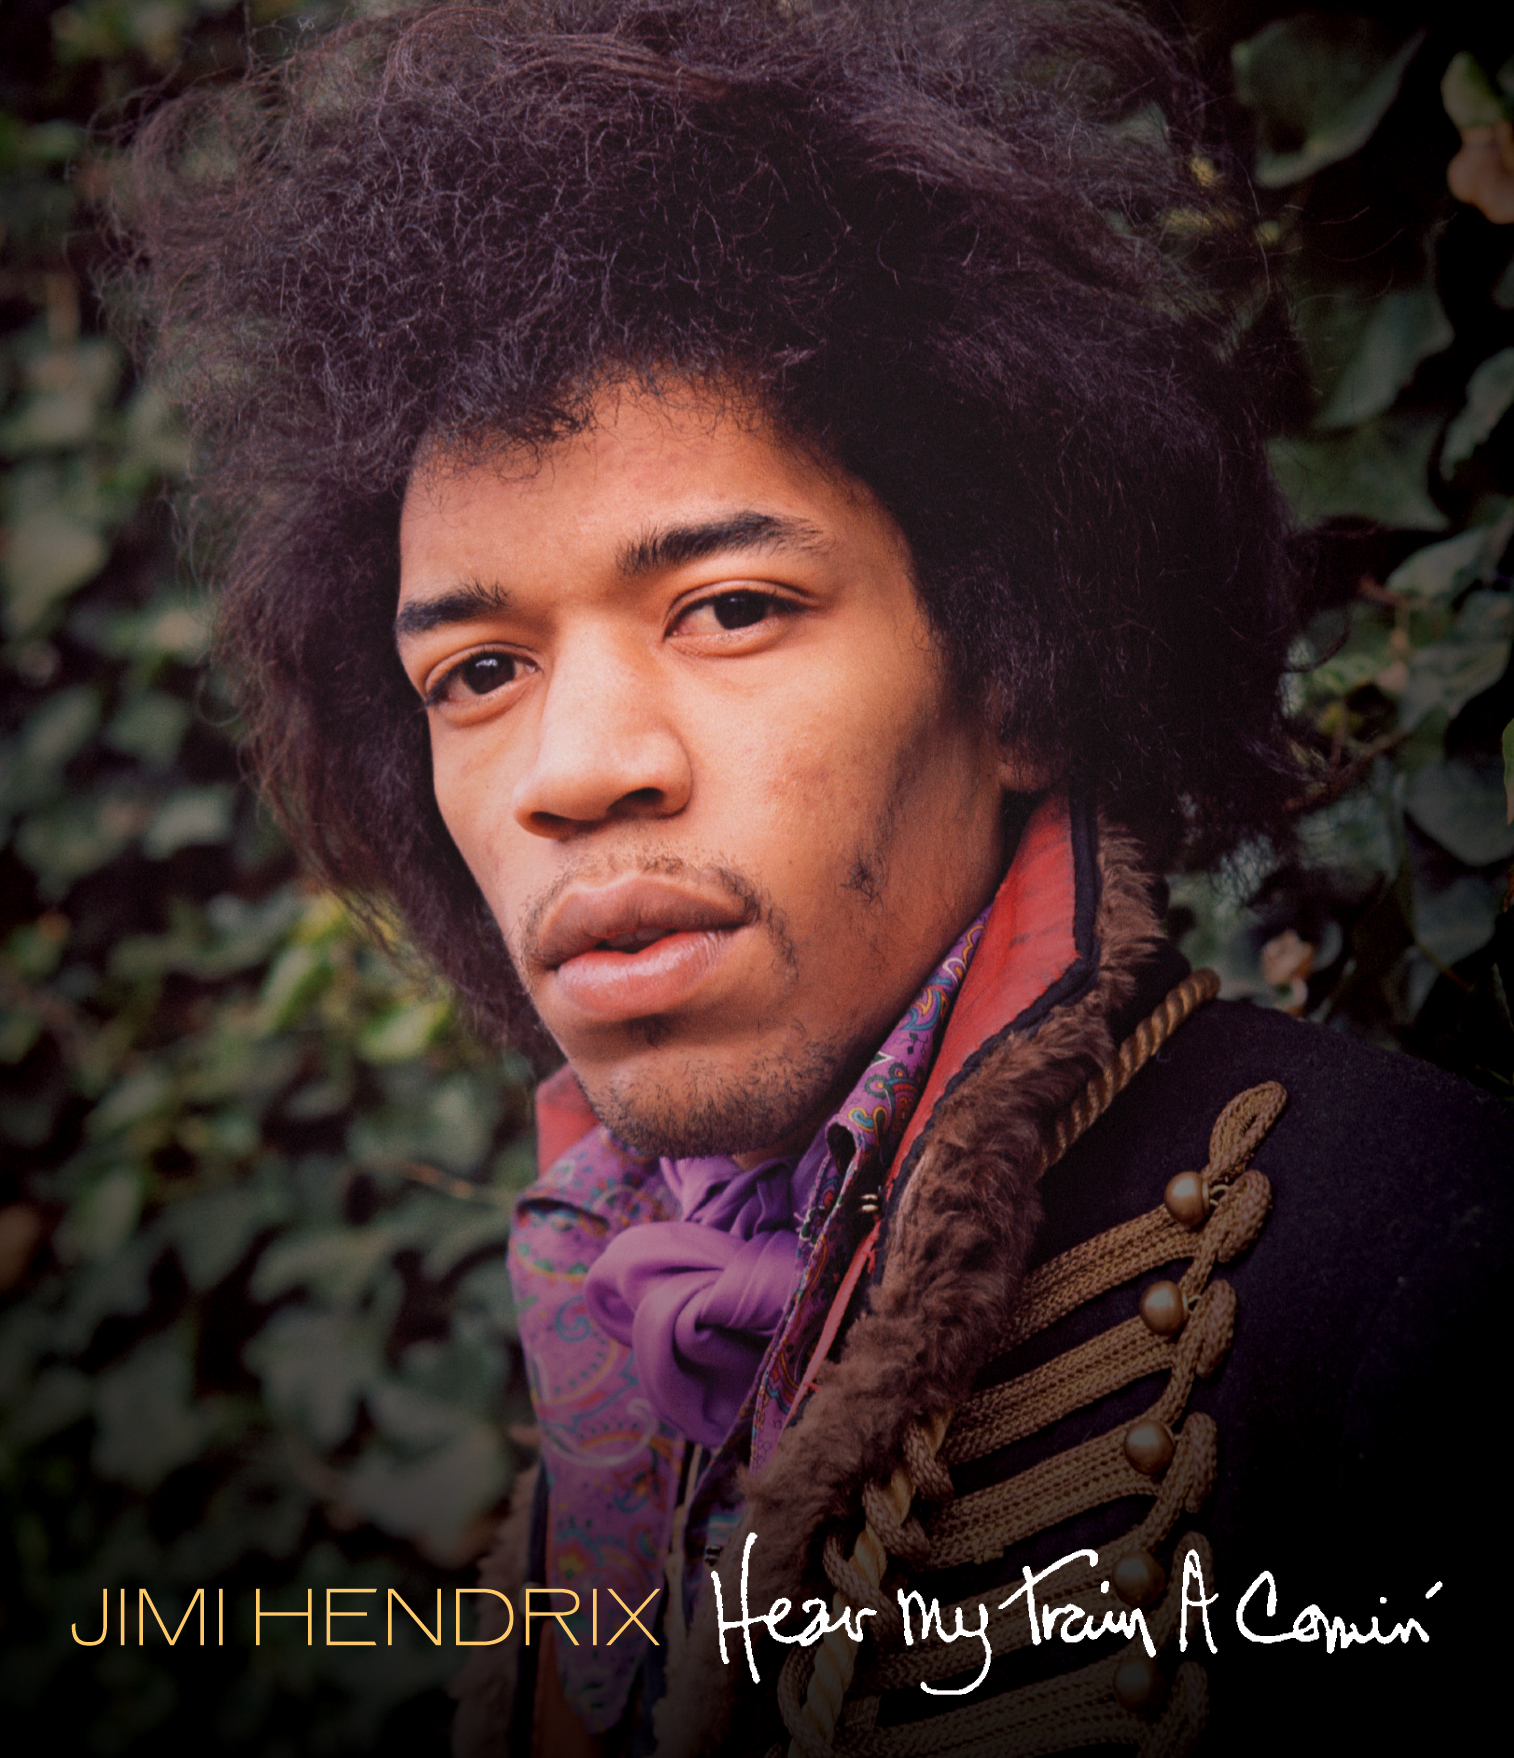 New Jimi Hendrix Live Album and New Documentary Out in November